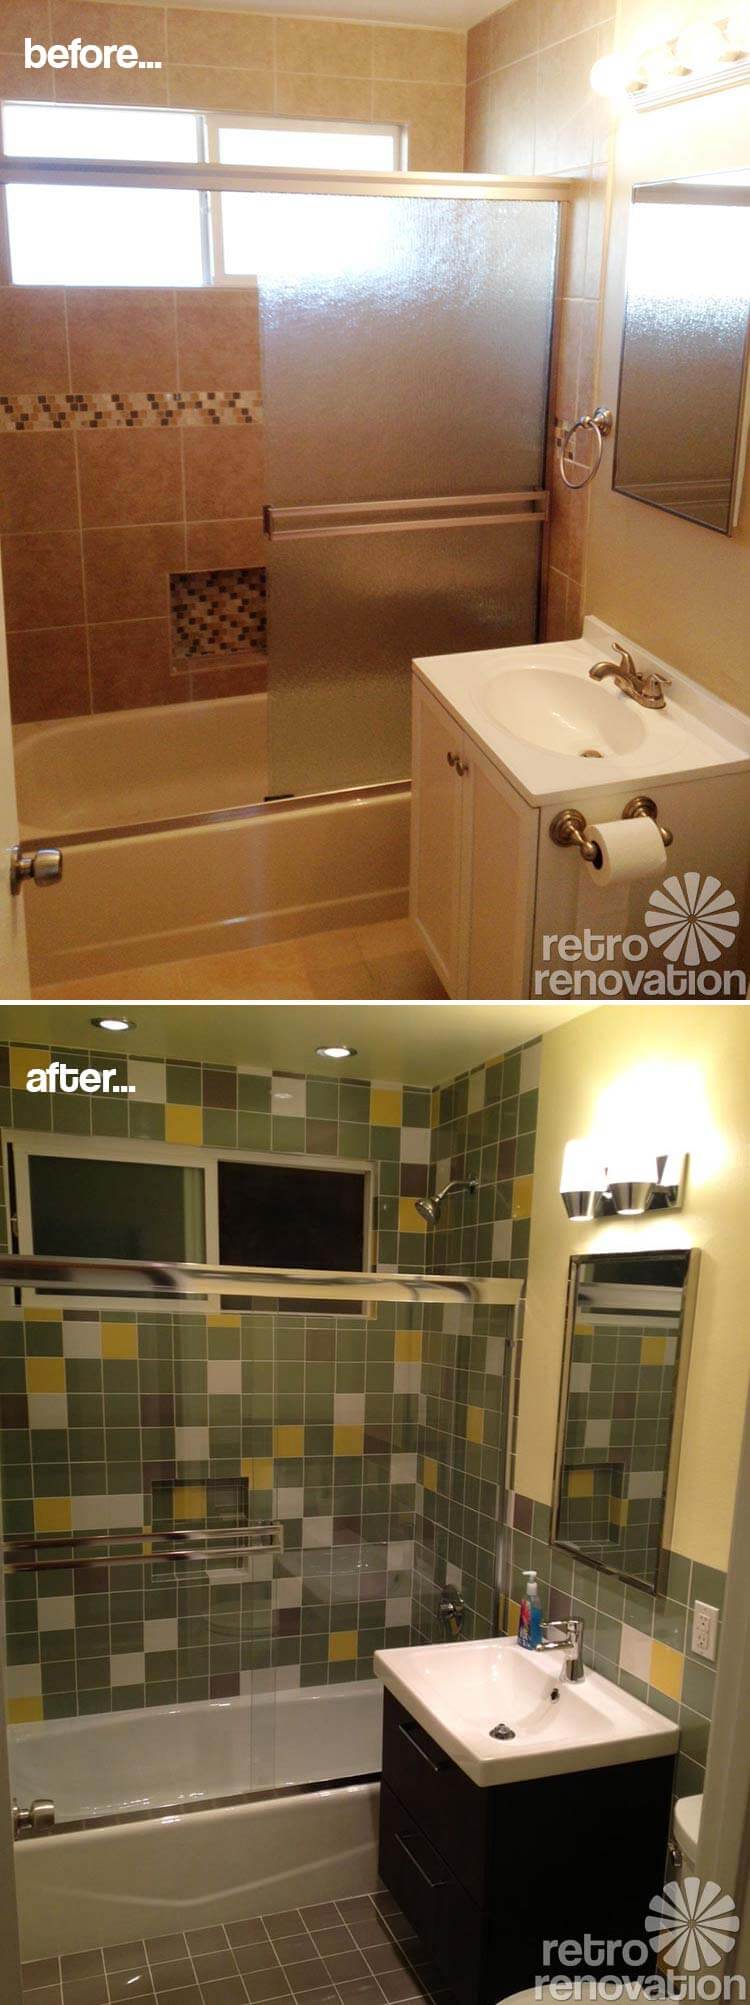 bathroom-before-and-after